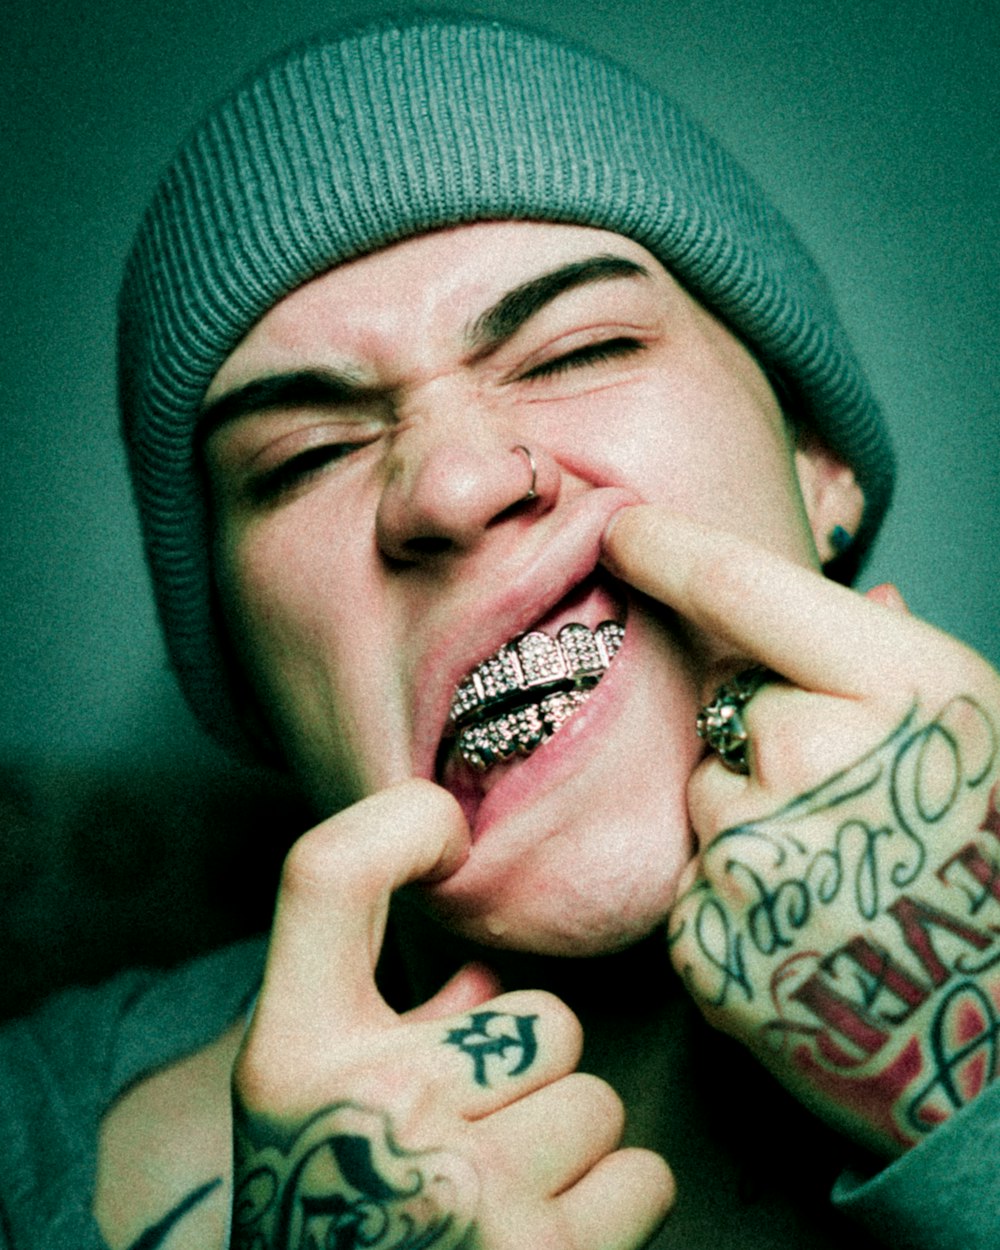 a man with tattoos and piercings on his fingers